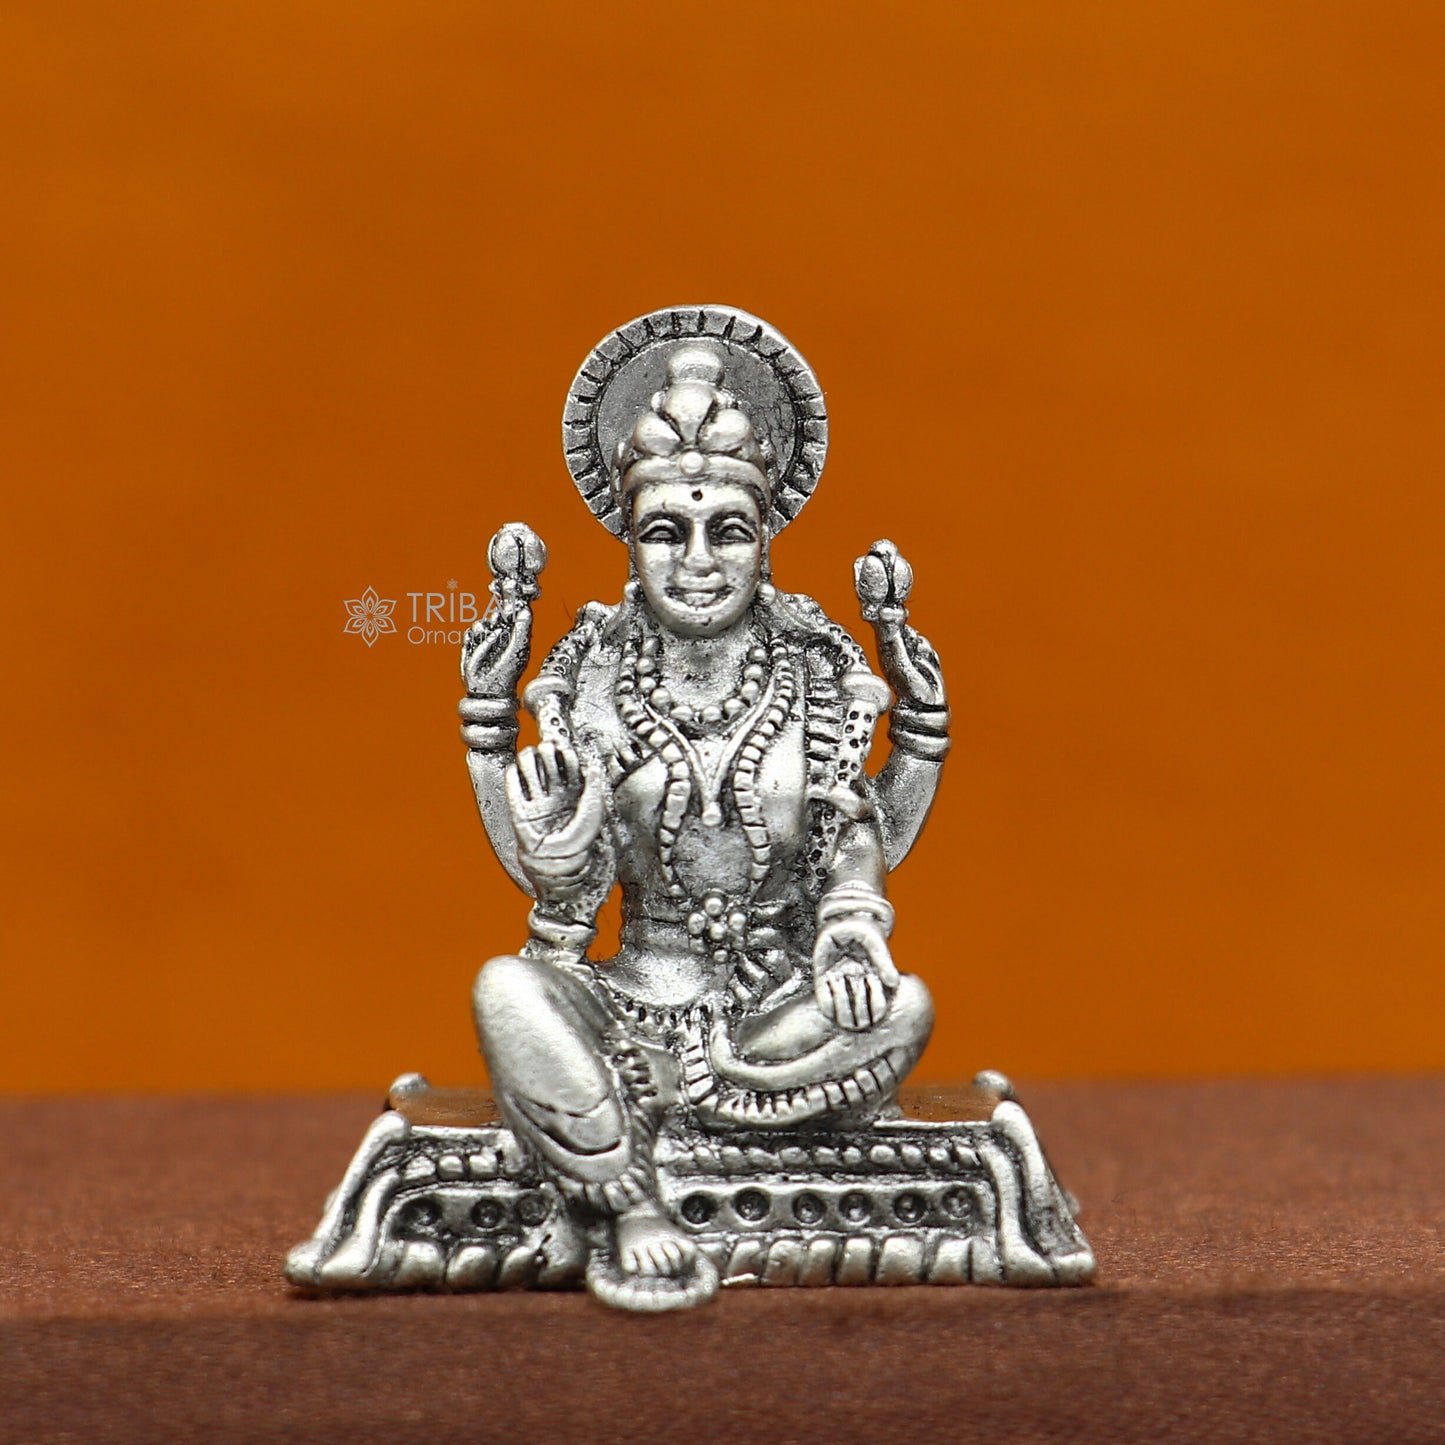 925 silver Goddess Lakshmi Divine statue figurine for puja,best way for Diwali festival puja or worshipping for wealth and prosperity art741 - TRIBAL ORNAMENTS